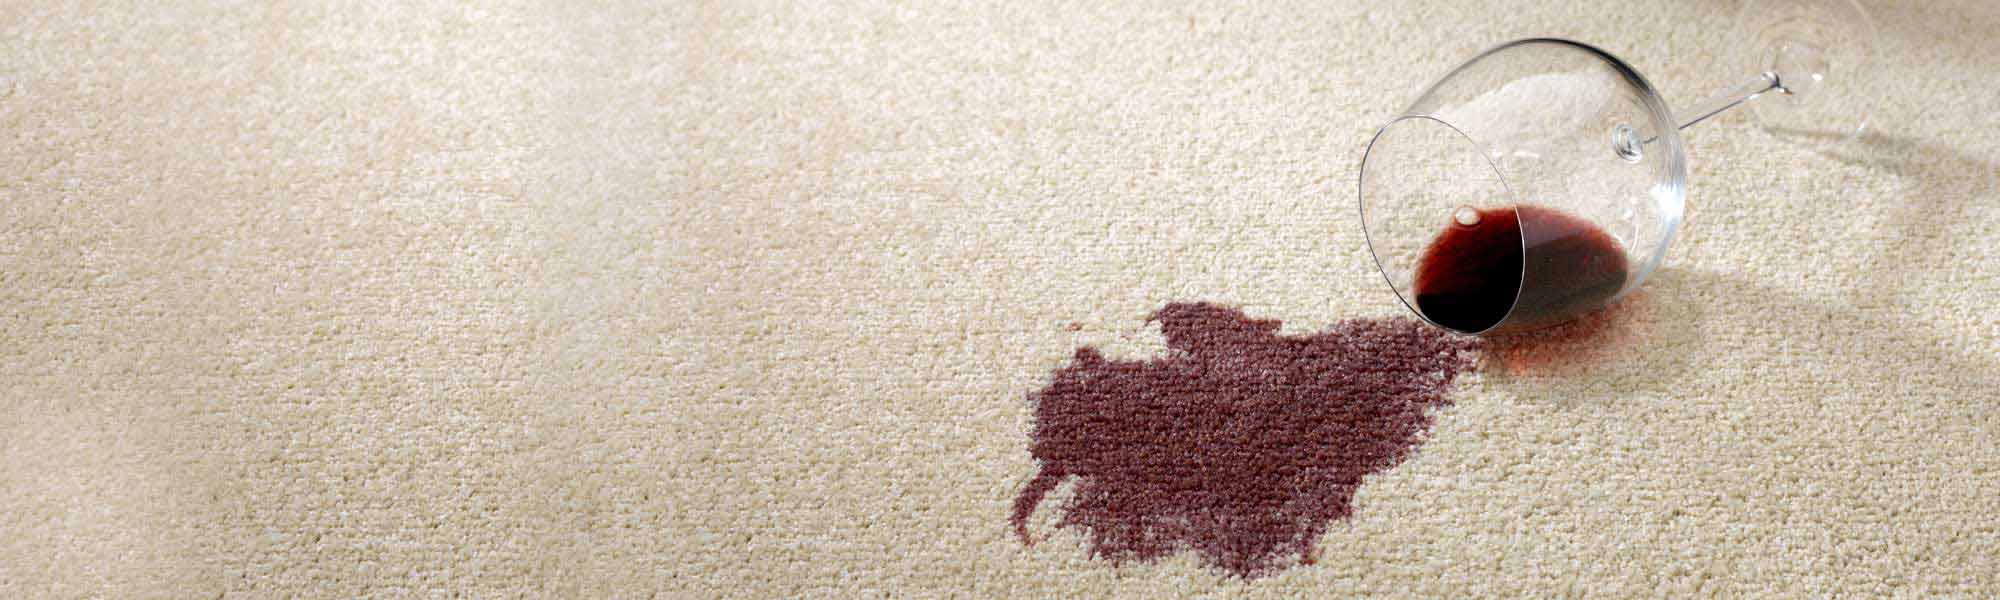 Treasure Coast Professional Stain Removal Service by Tropical Chem-Dry